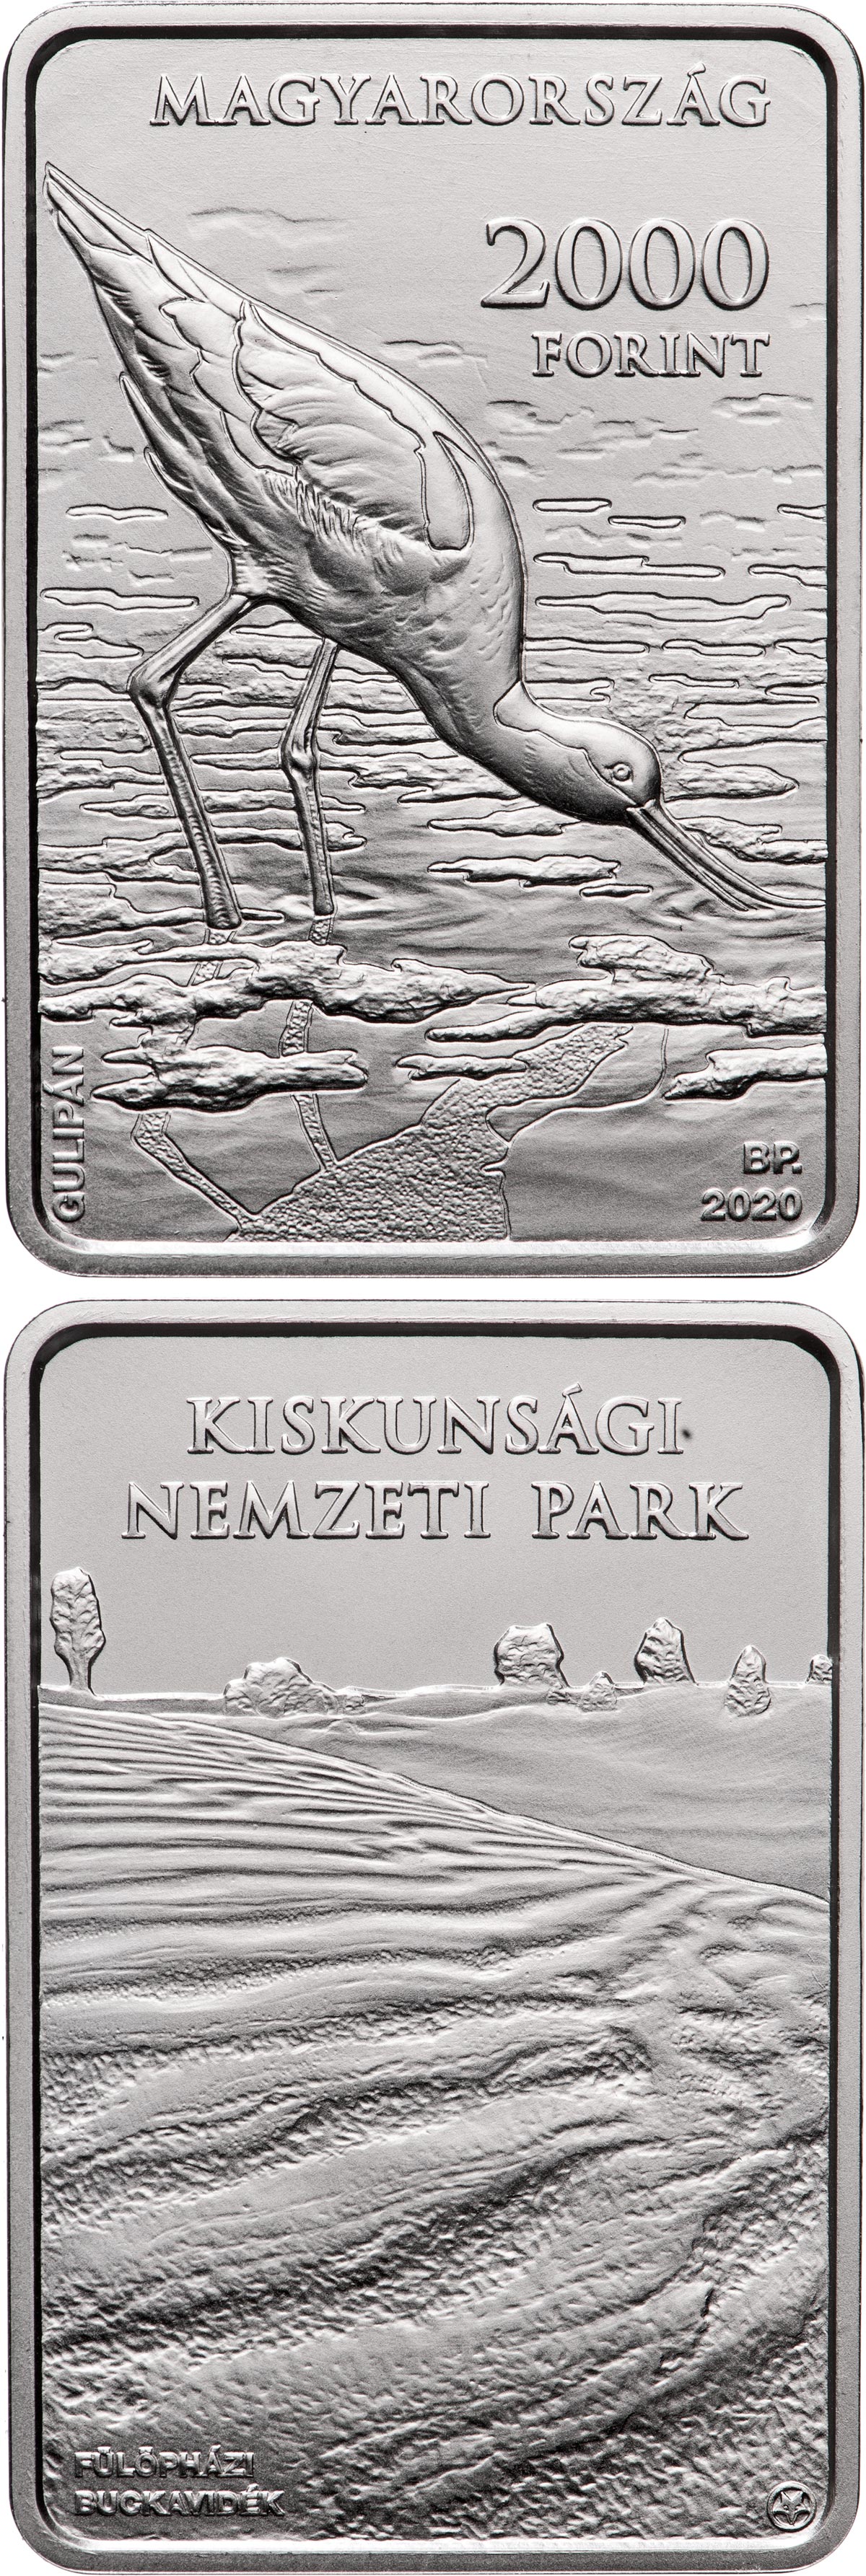 Image of 2000 forint coin - The Kiskunság National Park | Hungary 2020.  The Copper–Nickel (CuNi) coin is of BU quality.